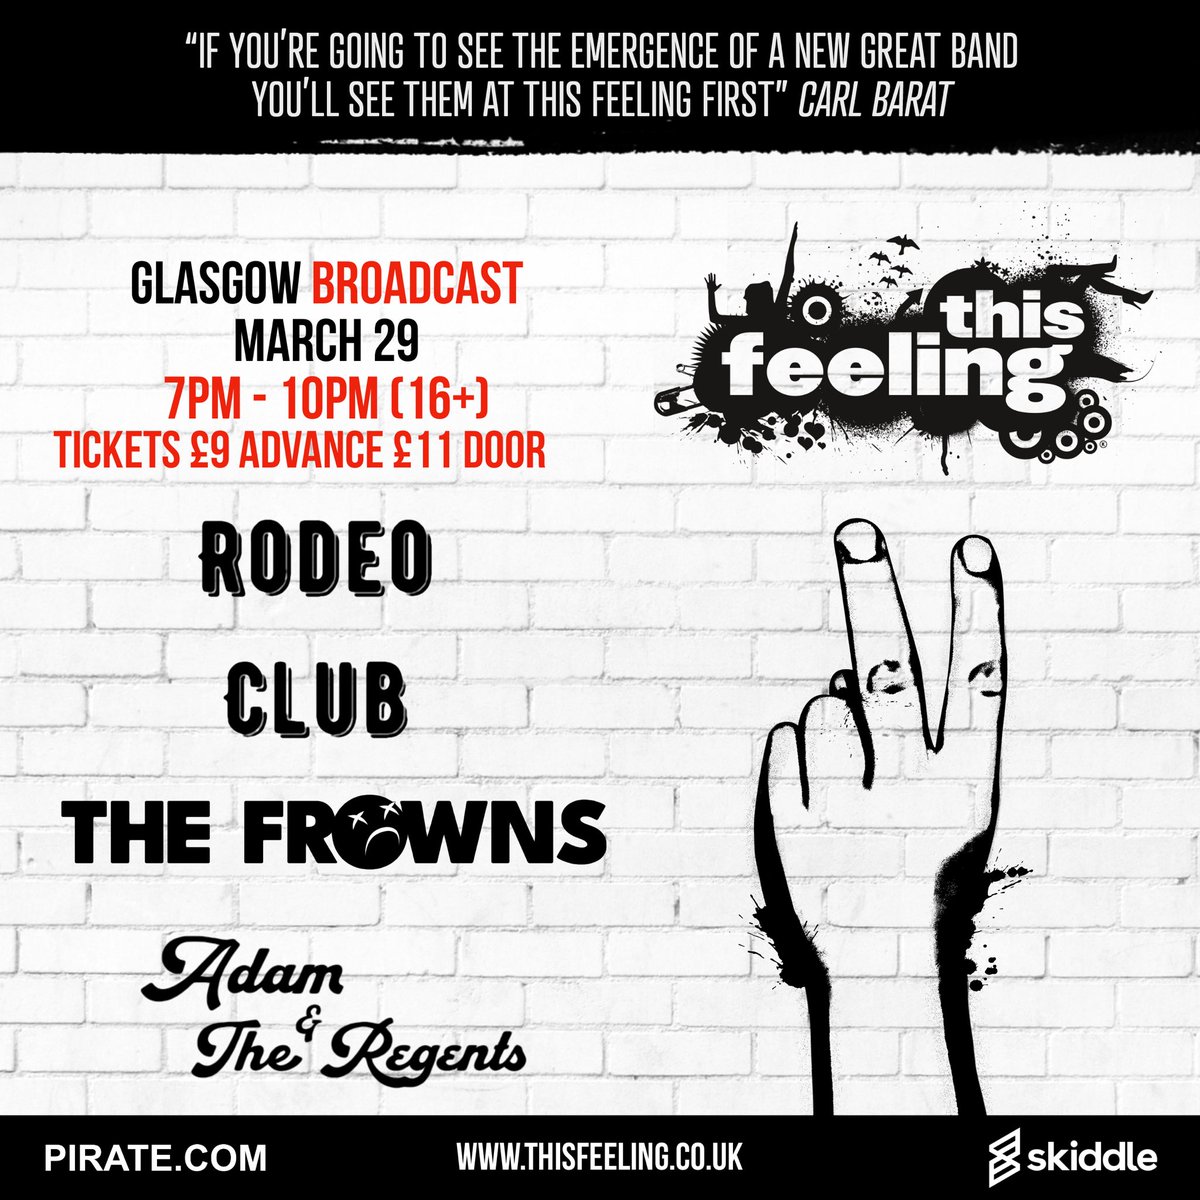 THIS FEELING! 🚨🚨 Another one for your calendars troops, we’re playing Broadcast on Friday the 29th of March with @This_Feeling Playing along side @AandTheRegents @rodeoclubband so should be a great night! See you guys there -The Frowns :(